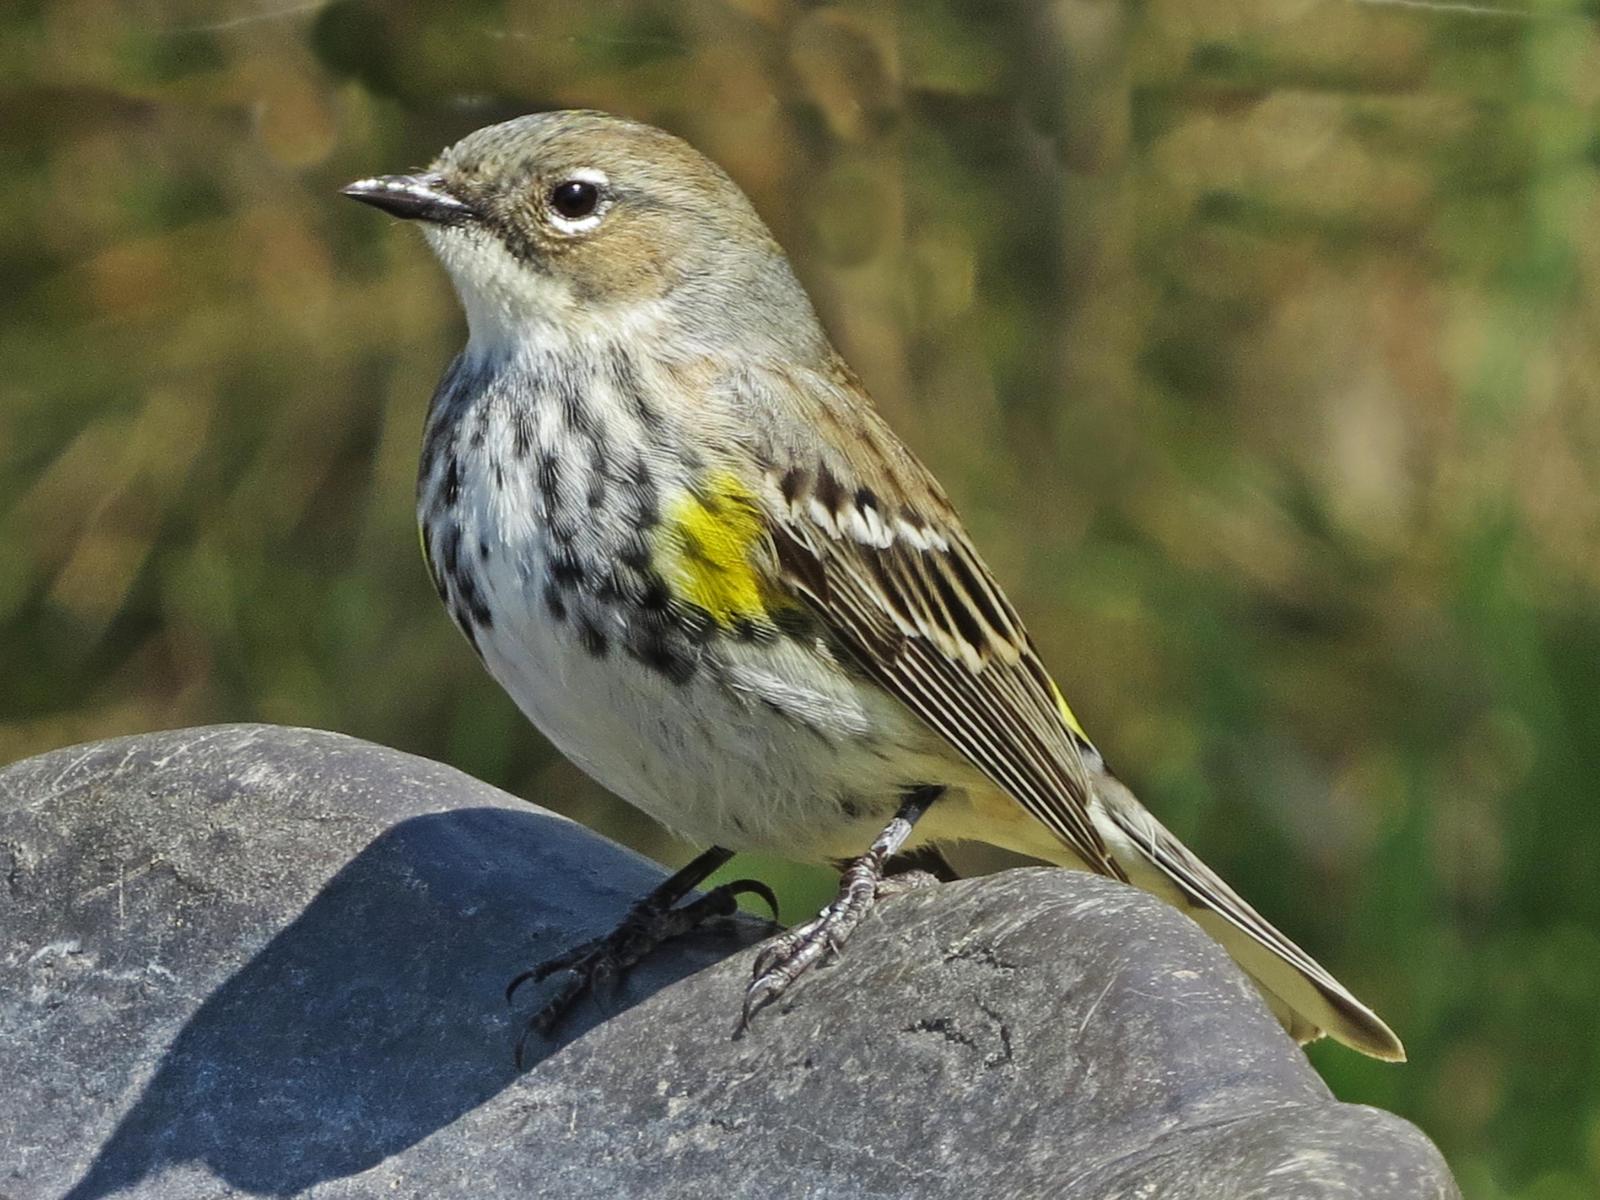 Yellow-rumped Warbler Photo by Bob Neugebauer